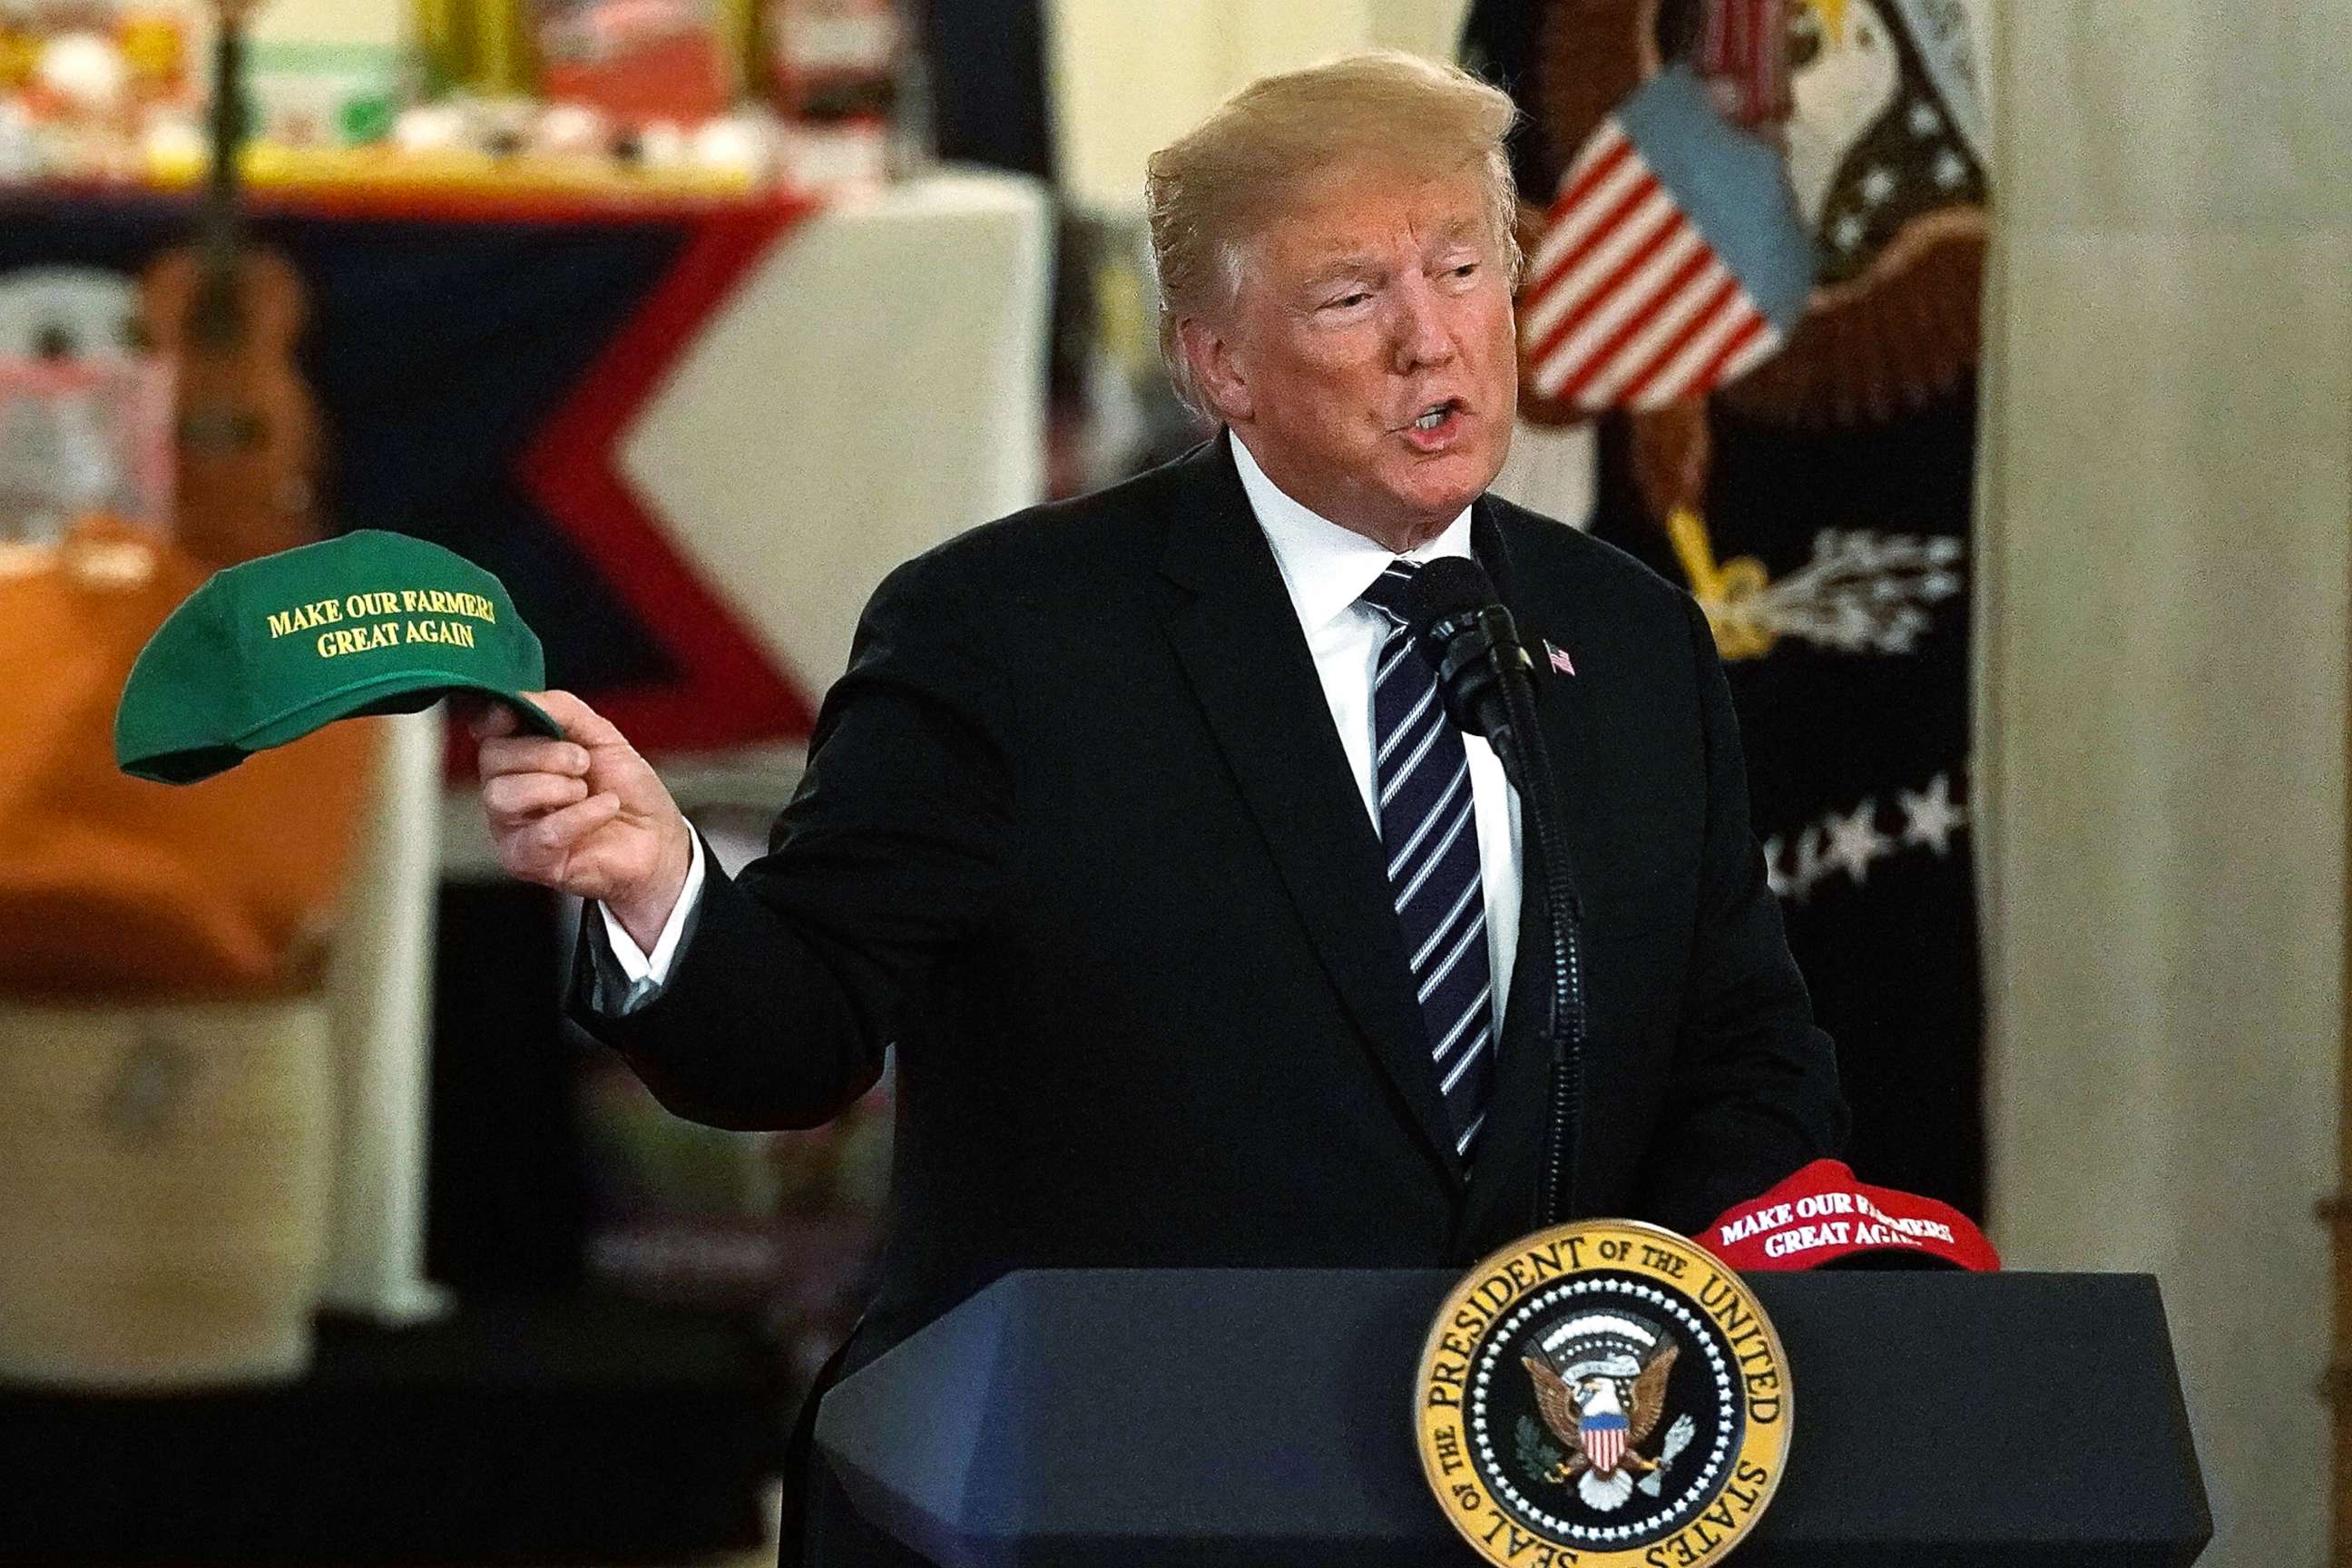 PHOTO: President Donald Trump holds up a "Make Our Farmers Great Again" hat as he speaks during the 2018 Made in America Product Showcase event July 23, 2018 at the White House in Washington. 